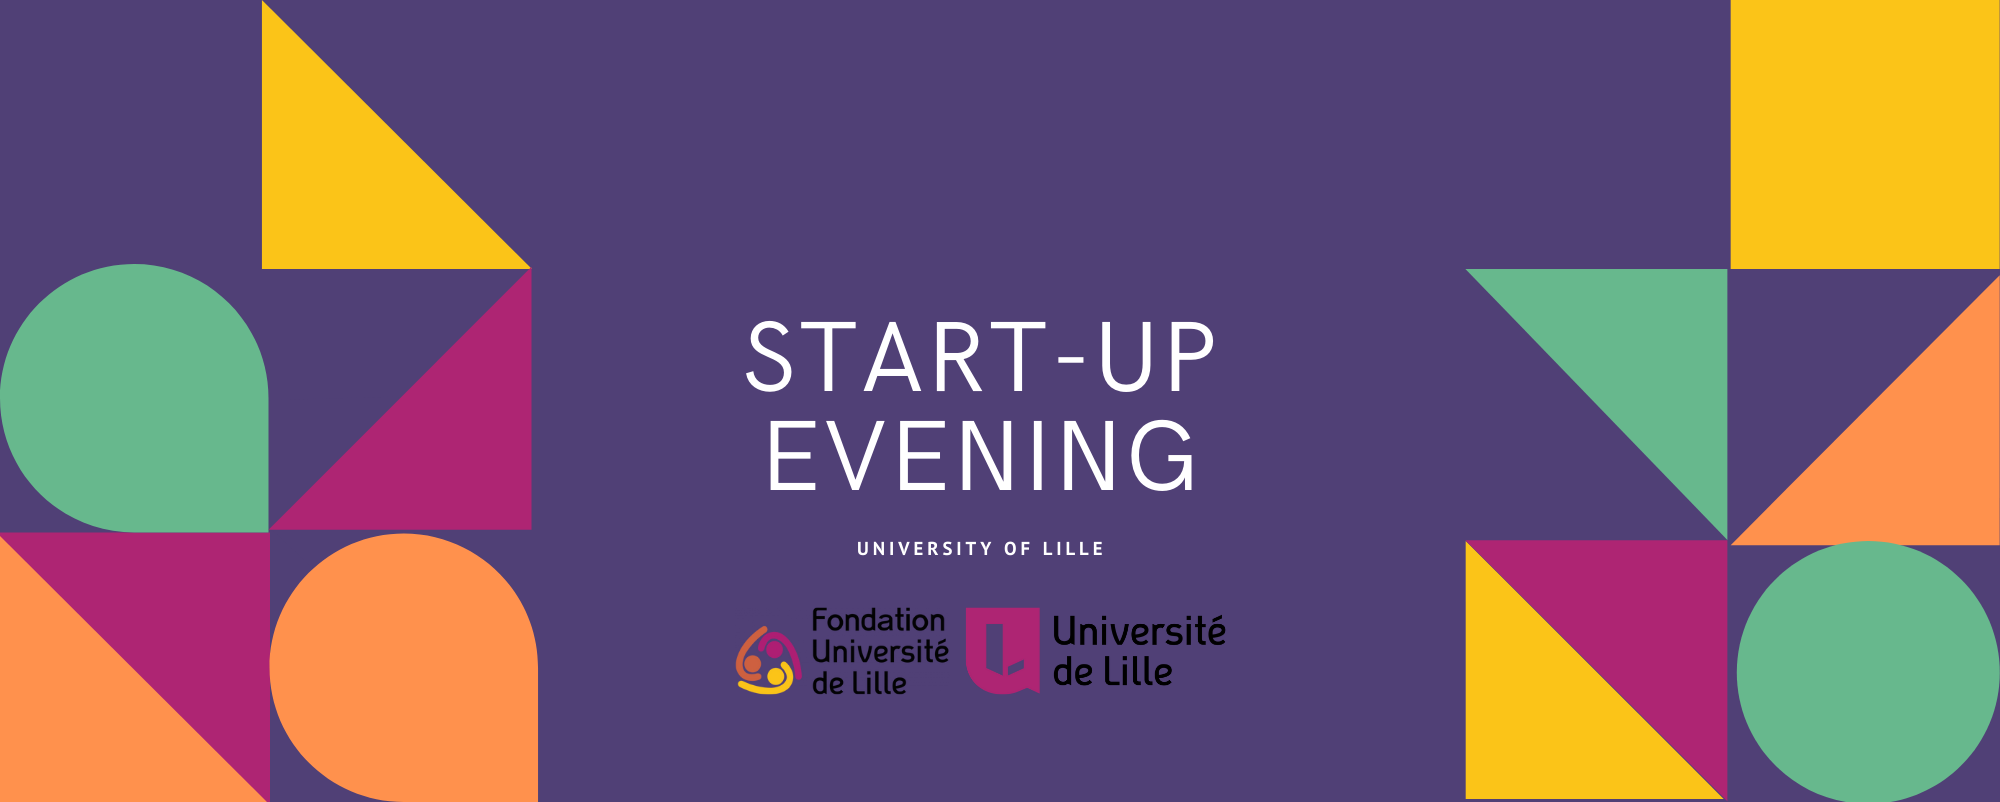 Startup evening at the University of Lille.